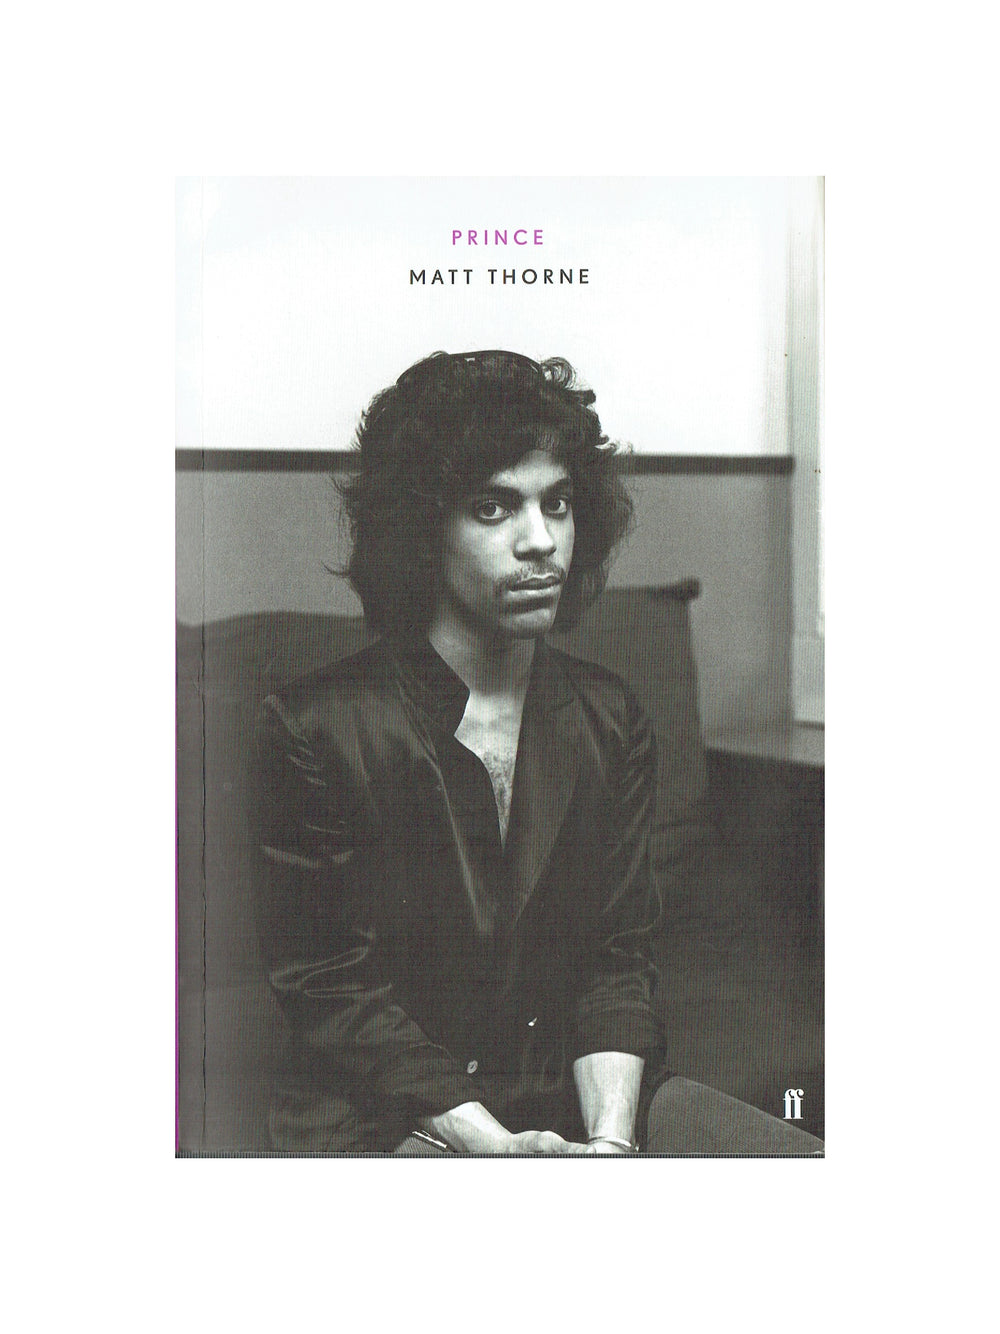 Prince – By Matt Thorne Paperback Softback Book 608 Pages Brand New 1st Edition